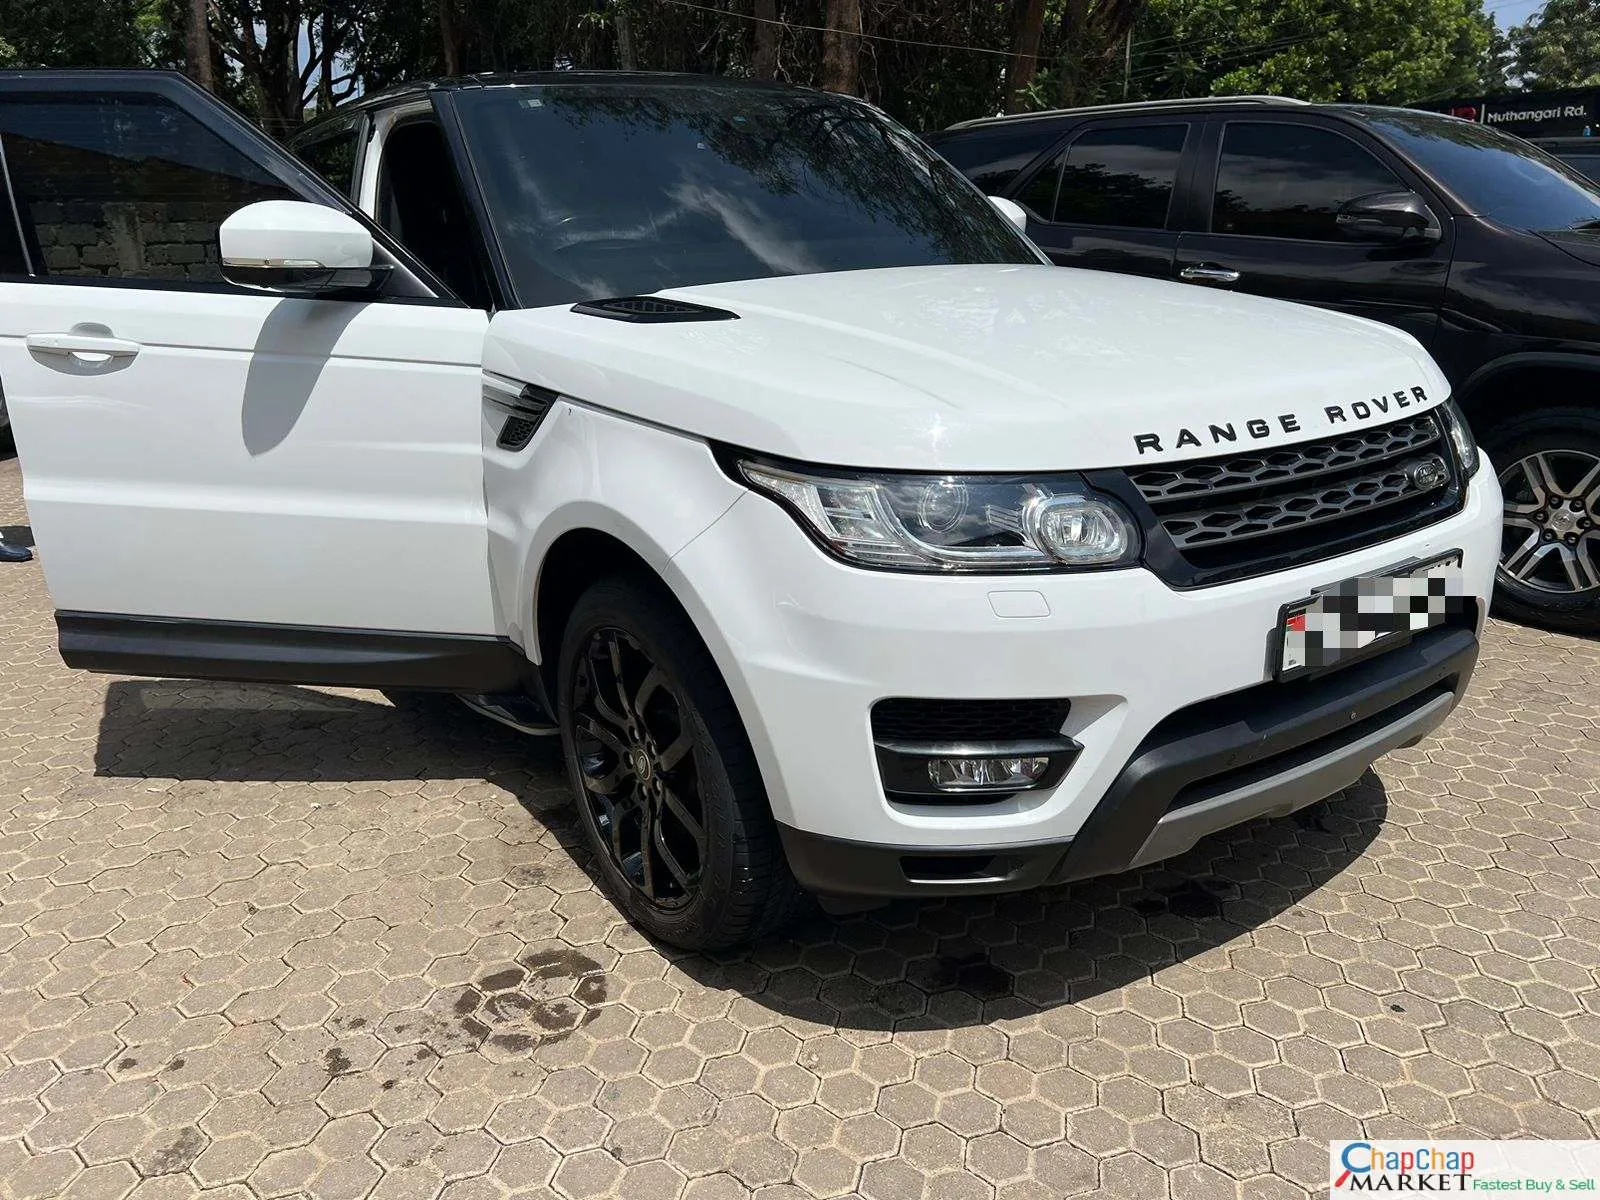 Range Rover Sport kenya petrol panoramic sunroof CHEAPEST You pay 30% deposit Trade in OK sport for sale in kenya hire purchase installments EXCLUSIVE